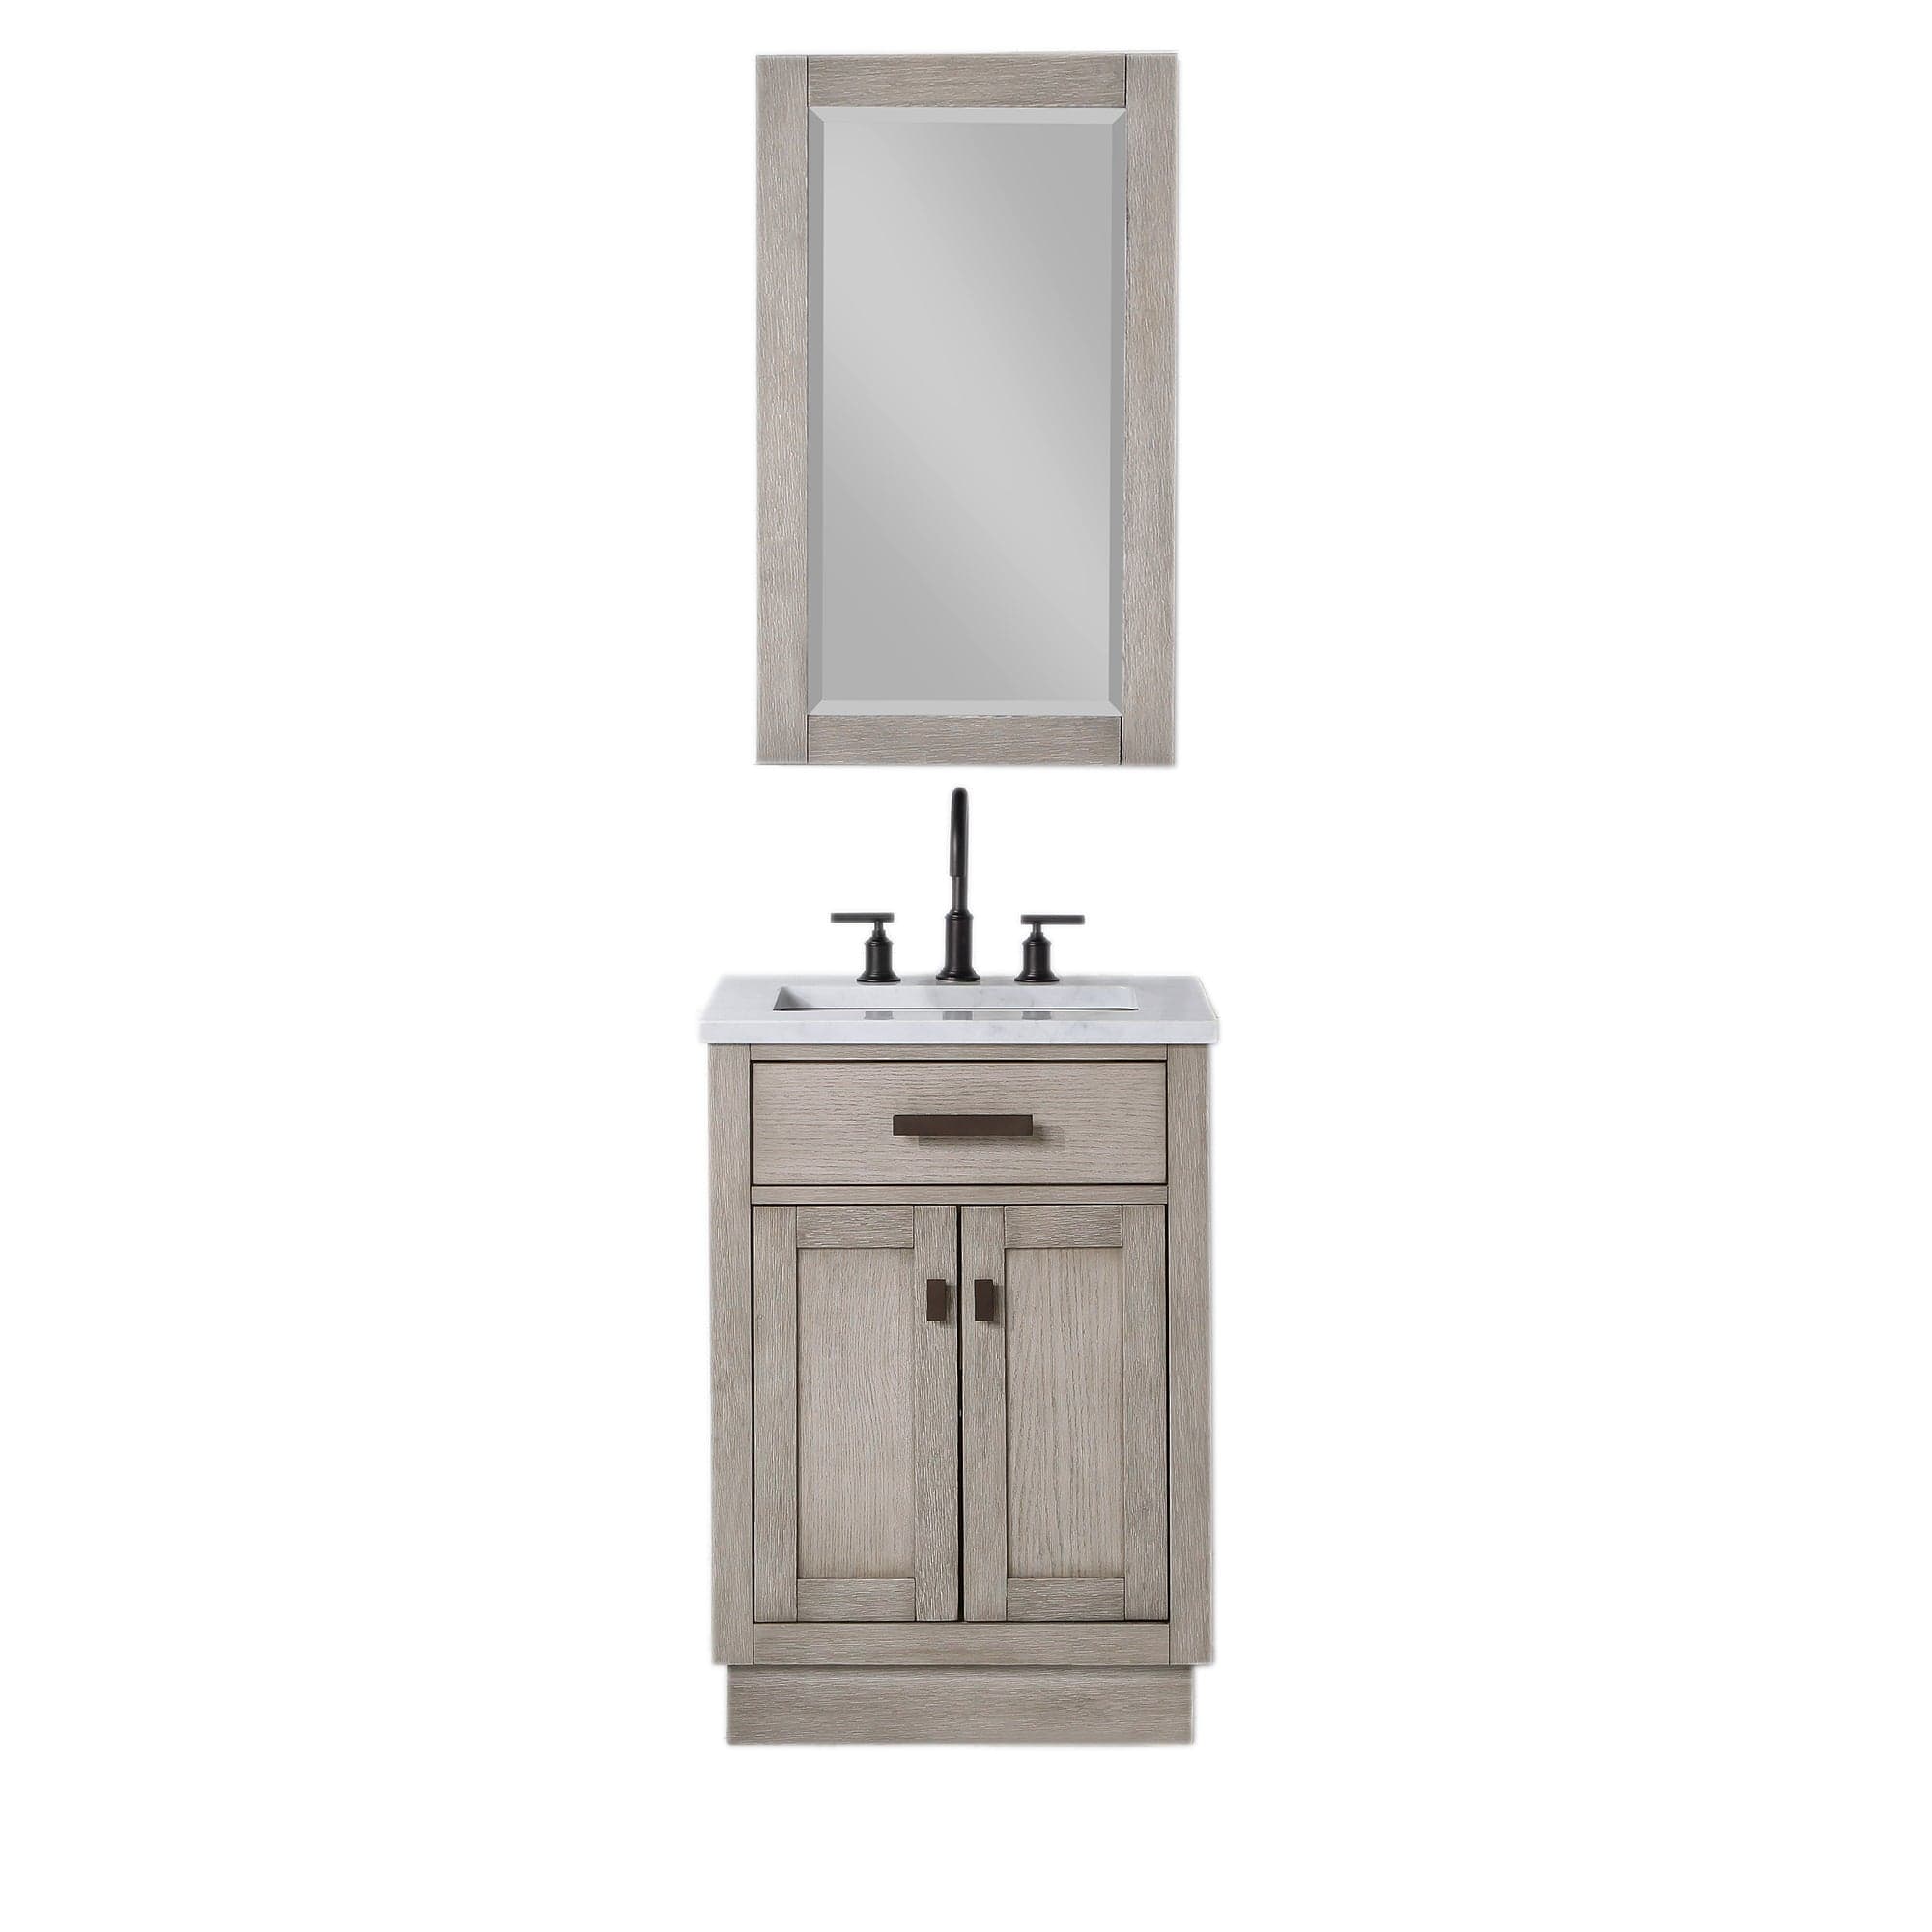 Chestnut 24 In. Single Sink Carrara White Marble Countertop Vanity In Grey Oak with Mirror - Molaix732030764552CH24CW03GK-R21000000